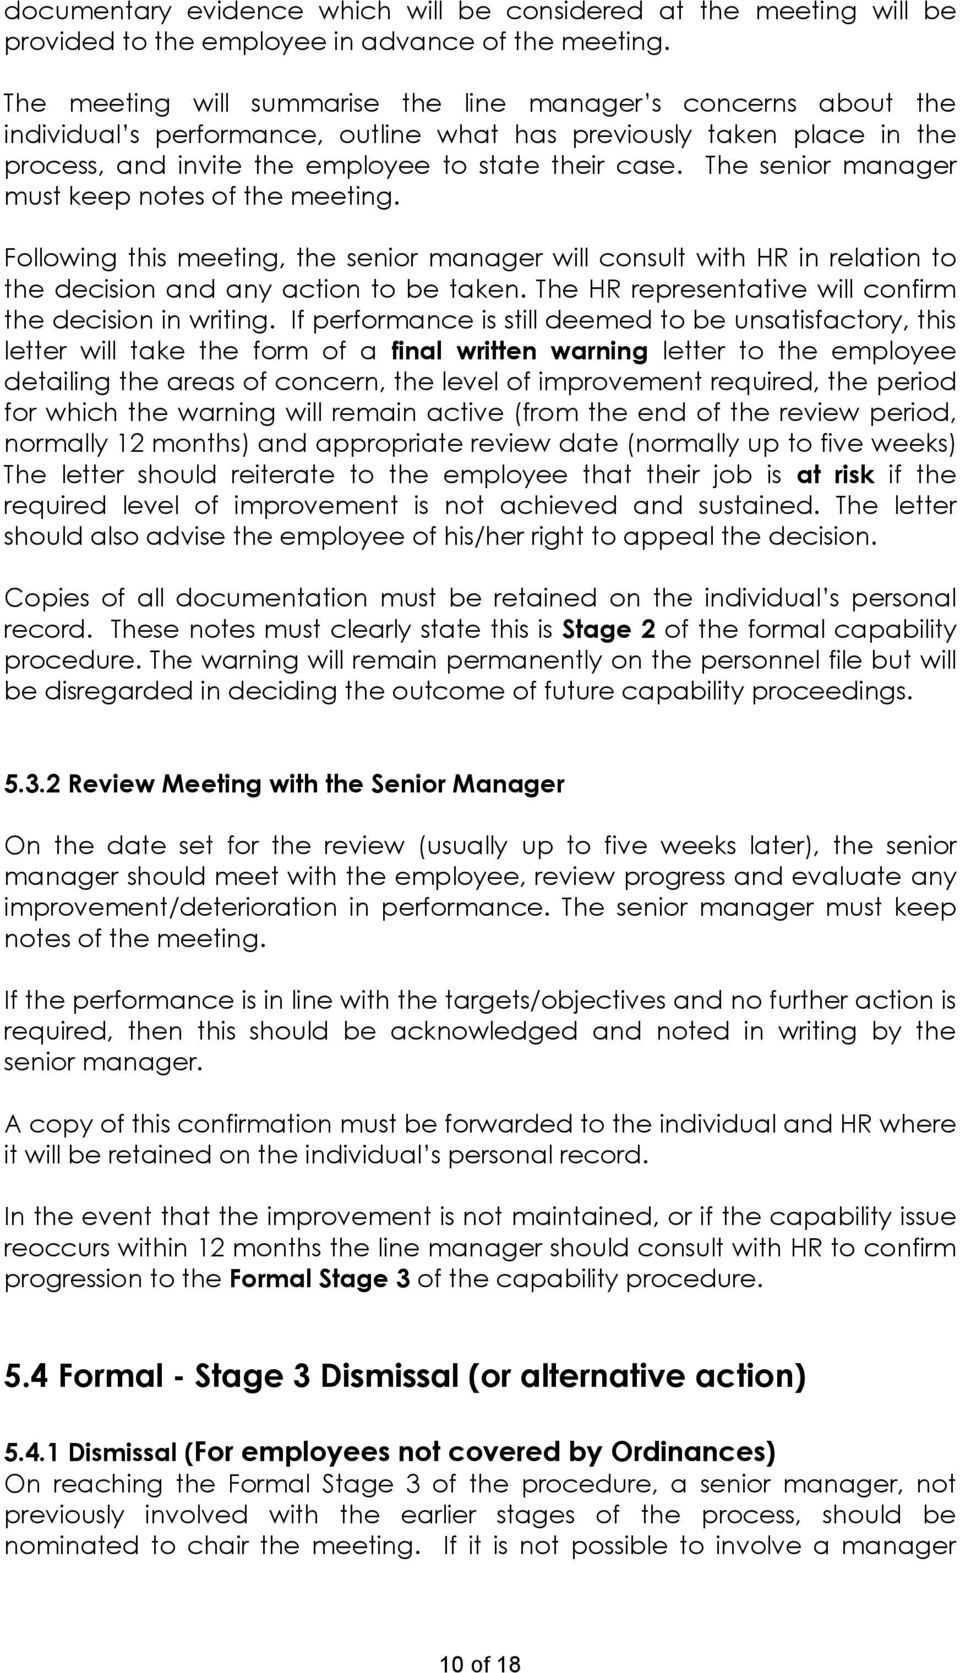 The senior manager must keep notes of the meeting. Following this meeting, the senior manager will consult with HR in relation to the decision and any action to be taken.